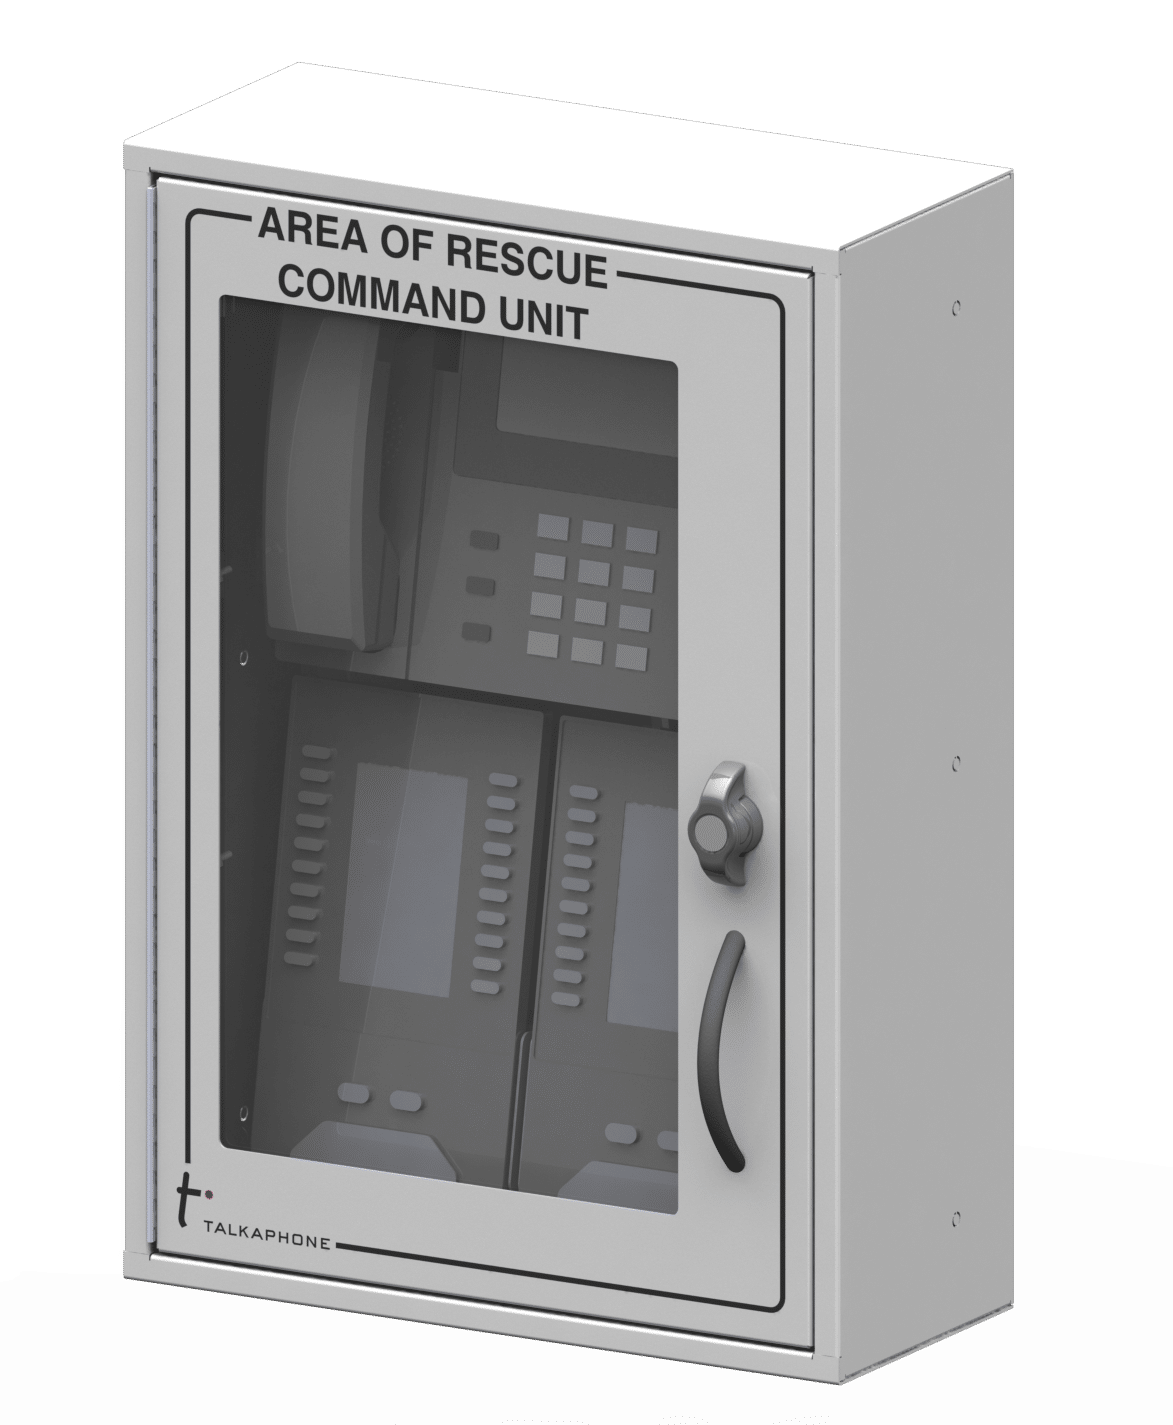 Area of Rescue 80-Station IP Command Unit